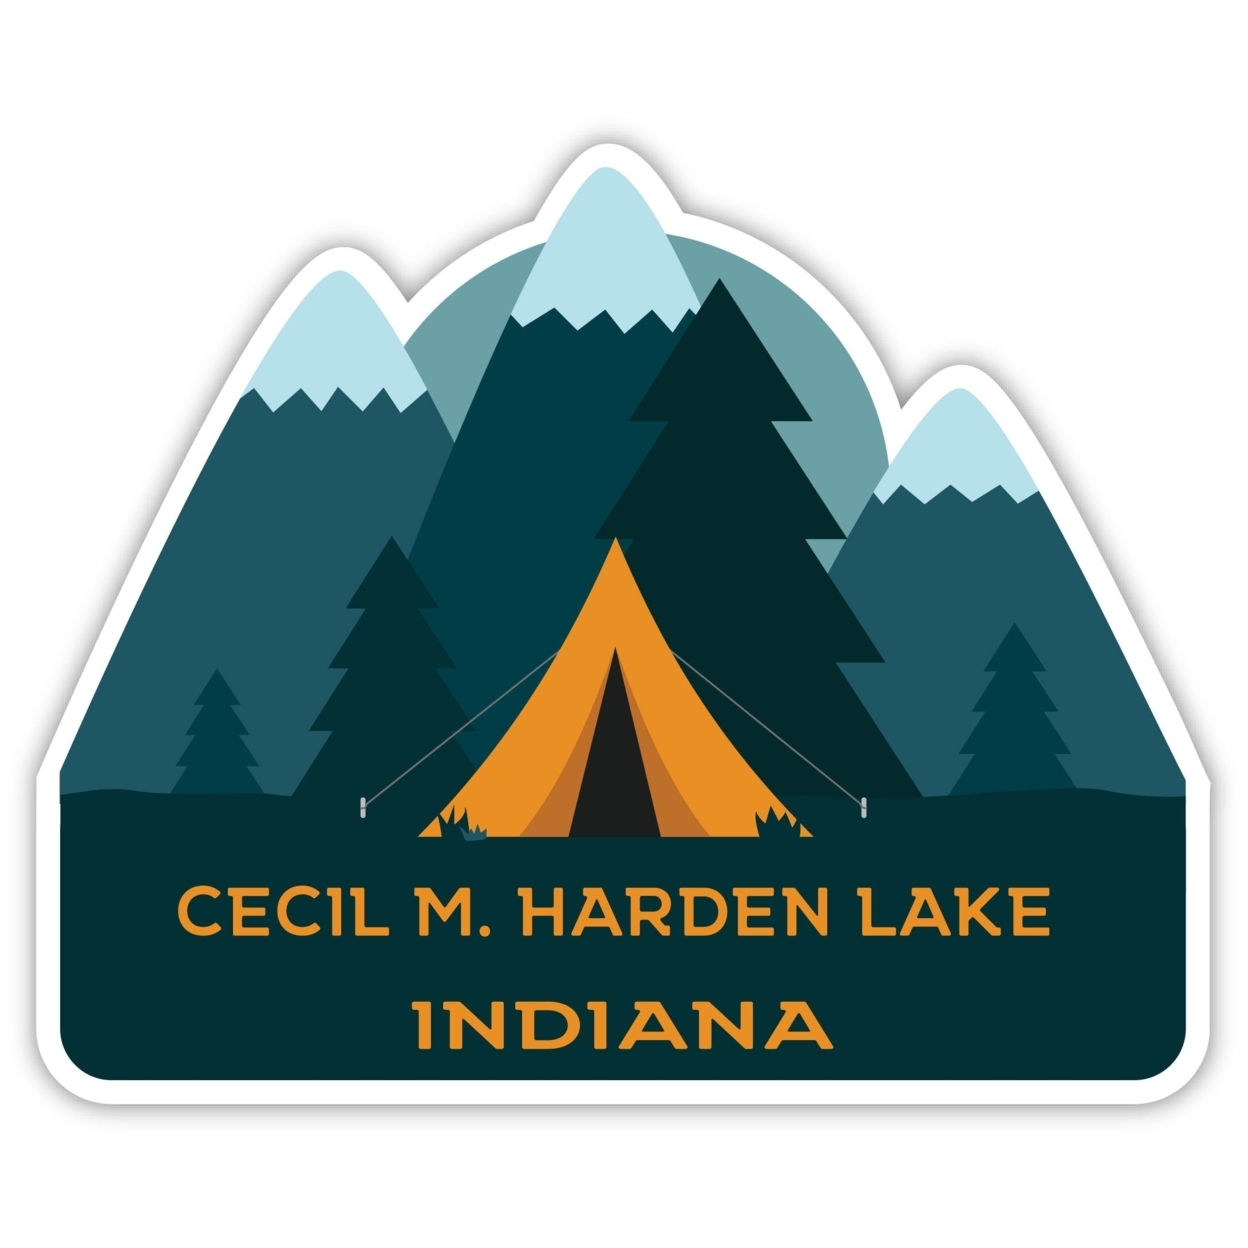 Cecil M. Harden Lake Indiana Souvenir Decorative Stickers (Choose Theme And Size) - 4-Pack, 6-Inch, Tent